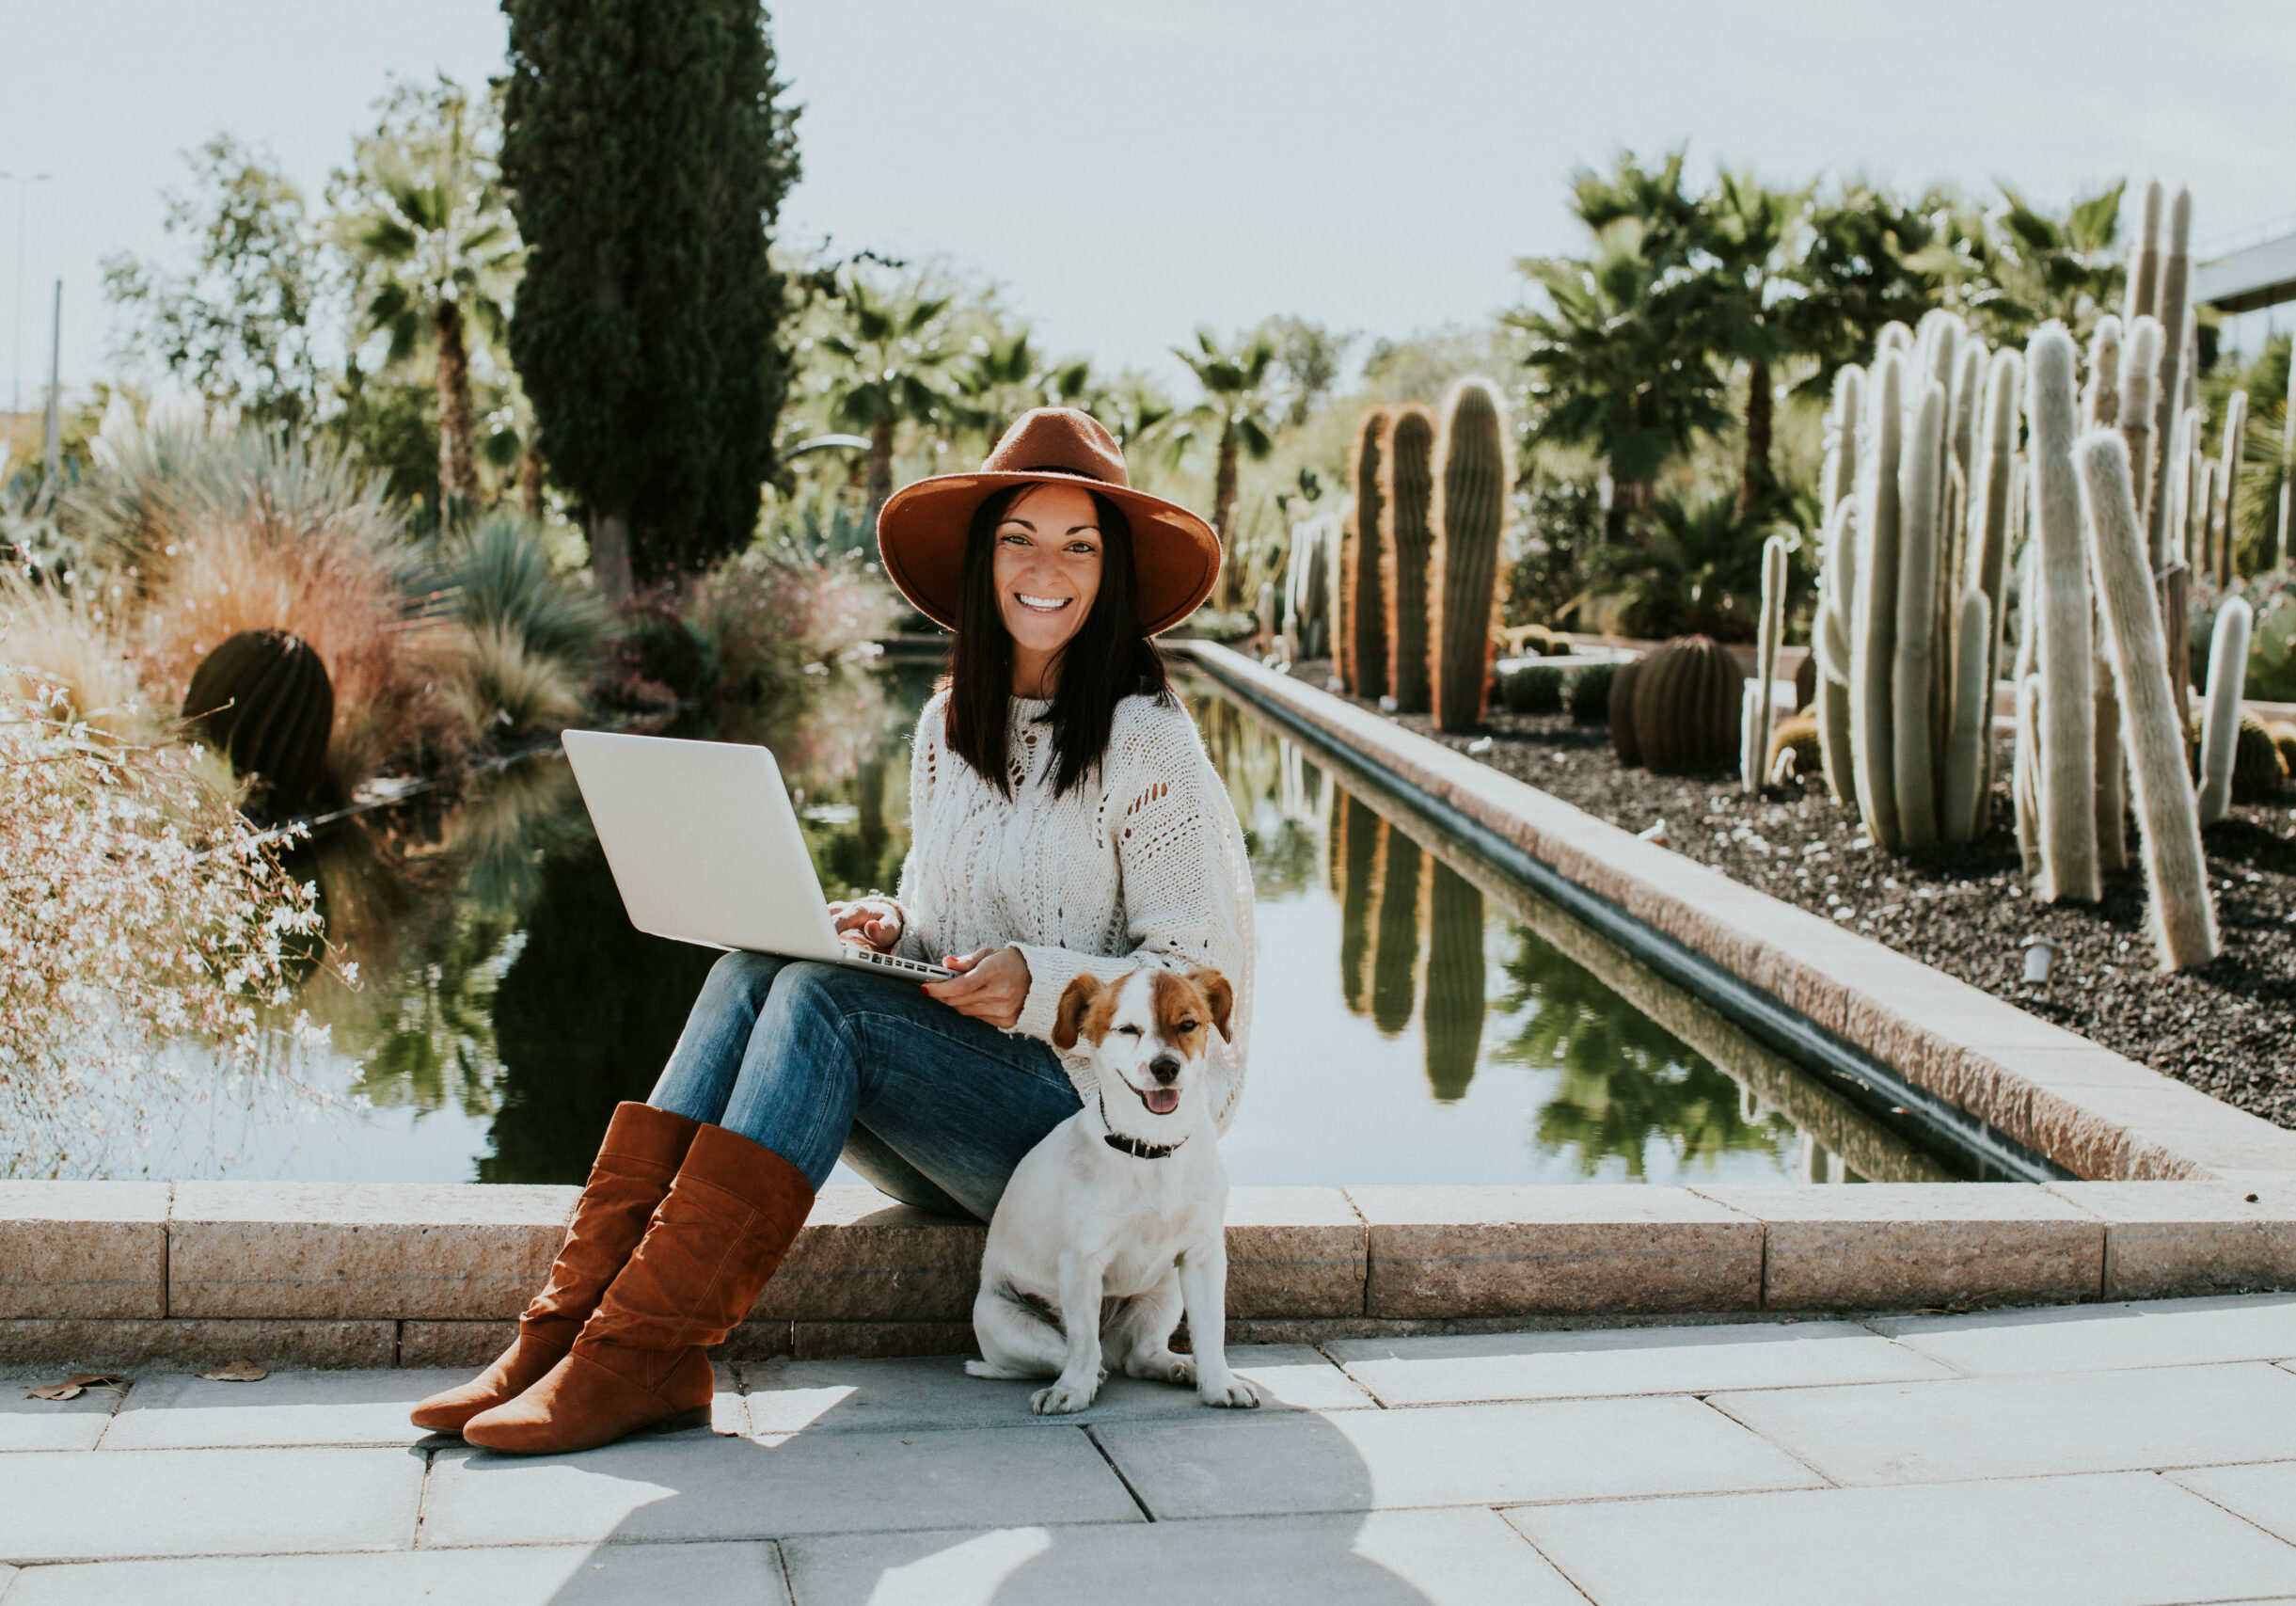 Pretty young woman working outdoors with her adorable dog jack rusell in a park surrounded by cactus and a small pond.